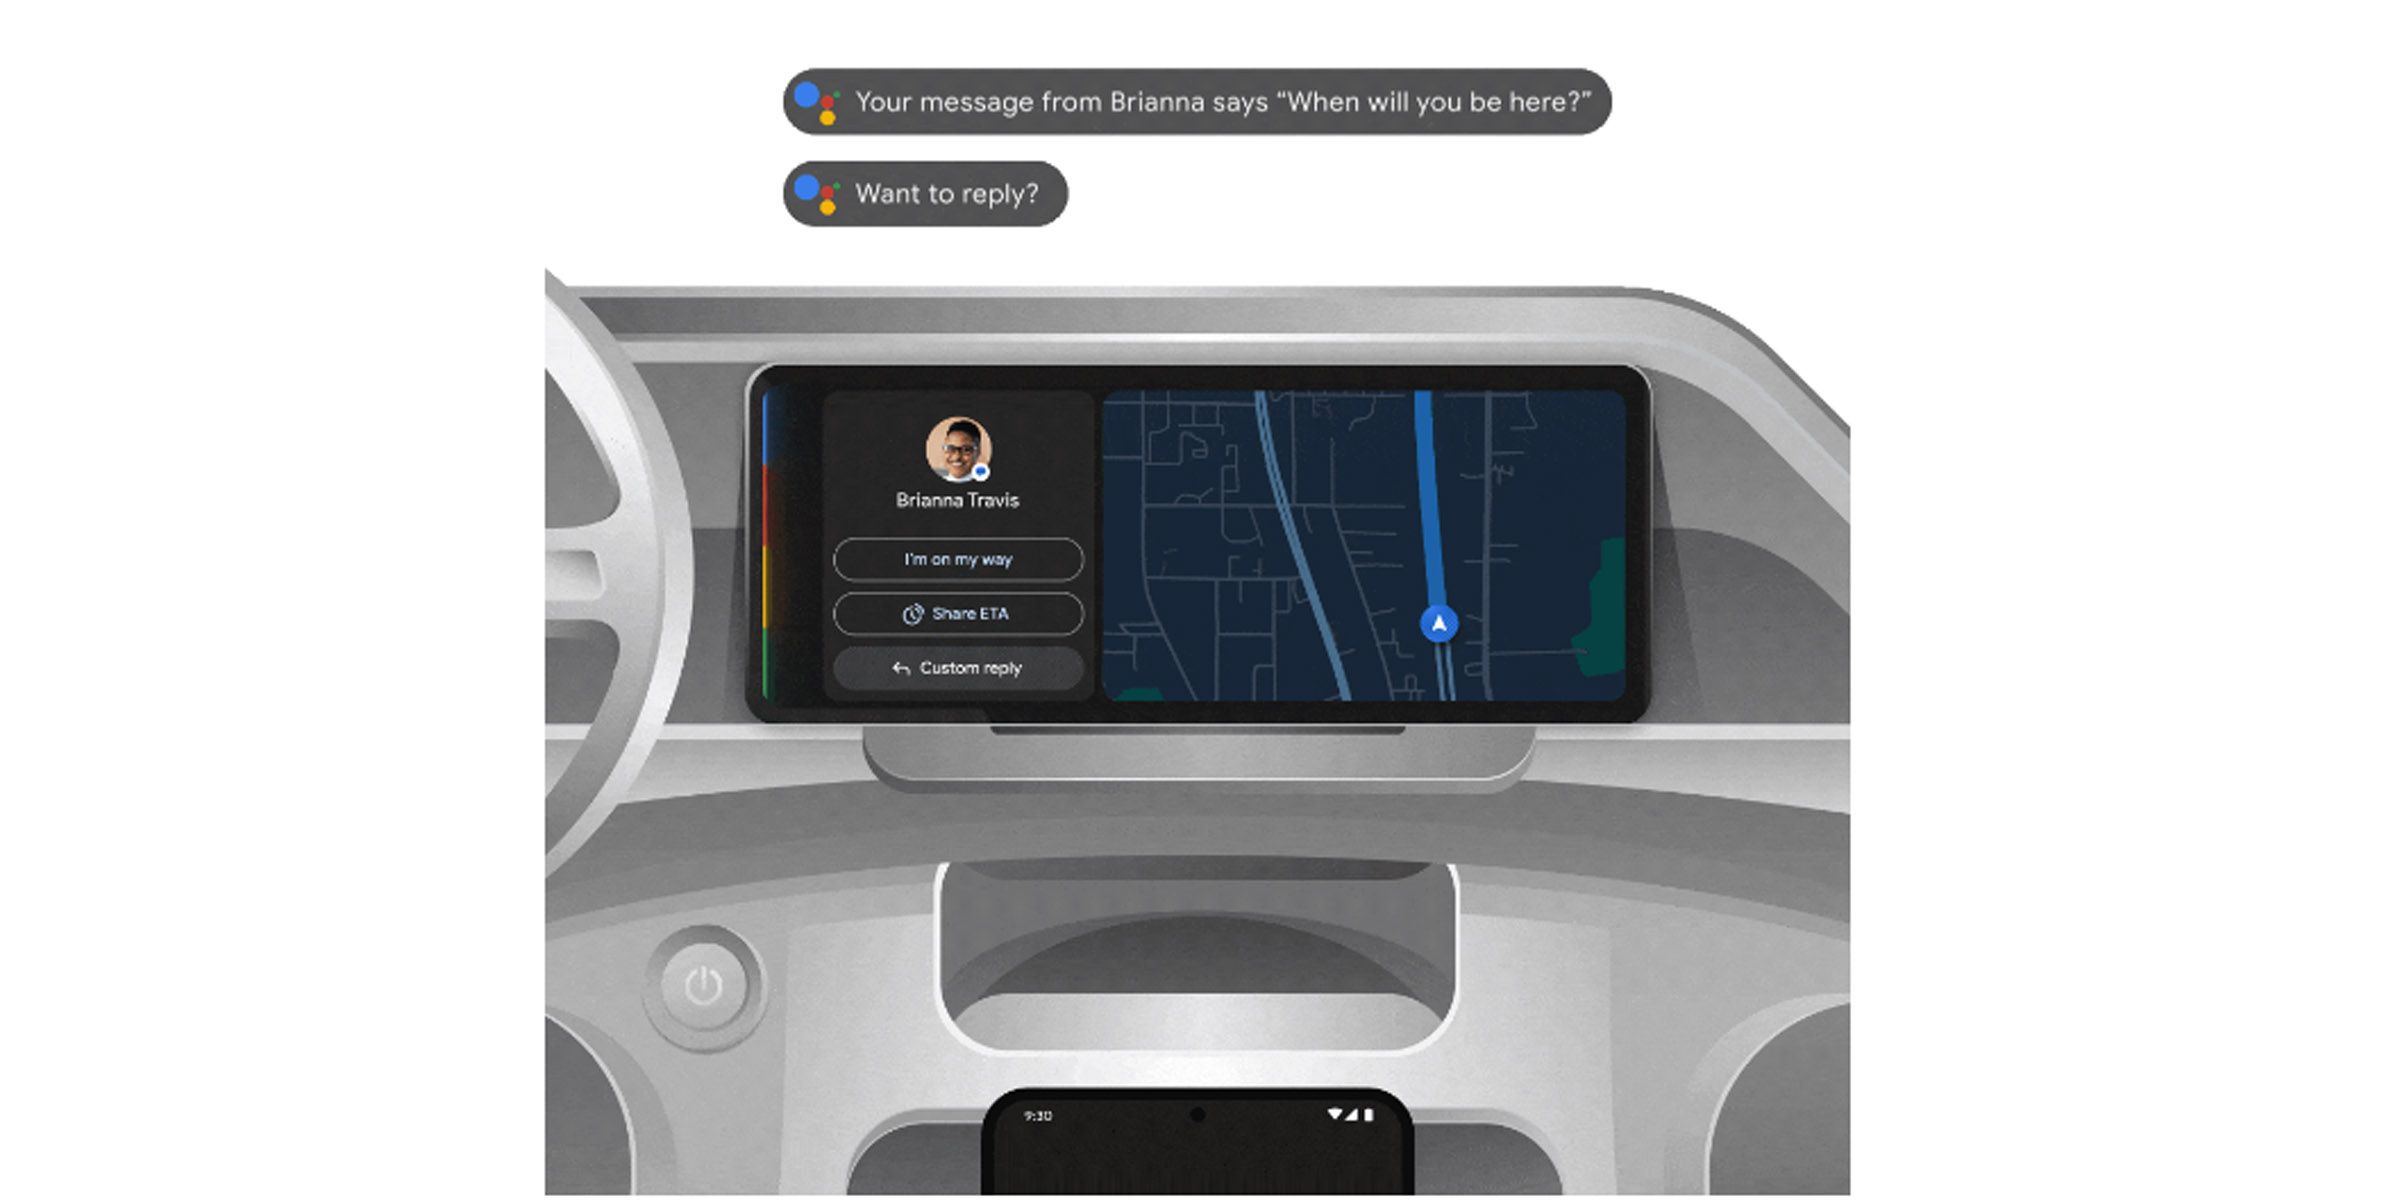 Android Auto with AI-assisted summaries and replies